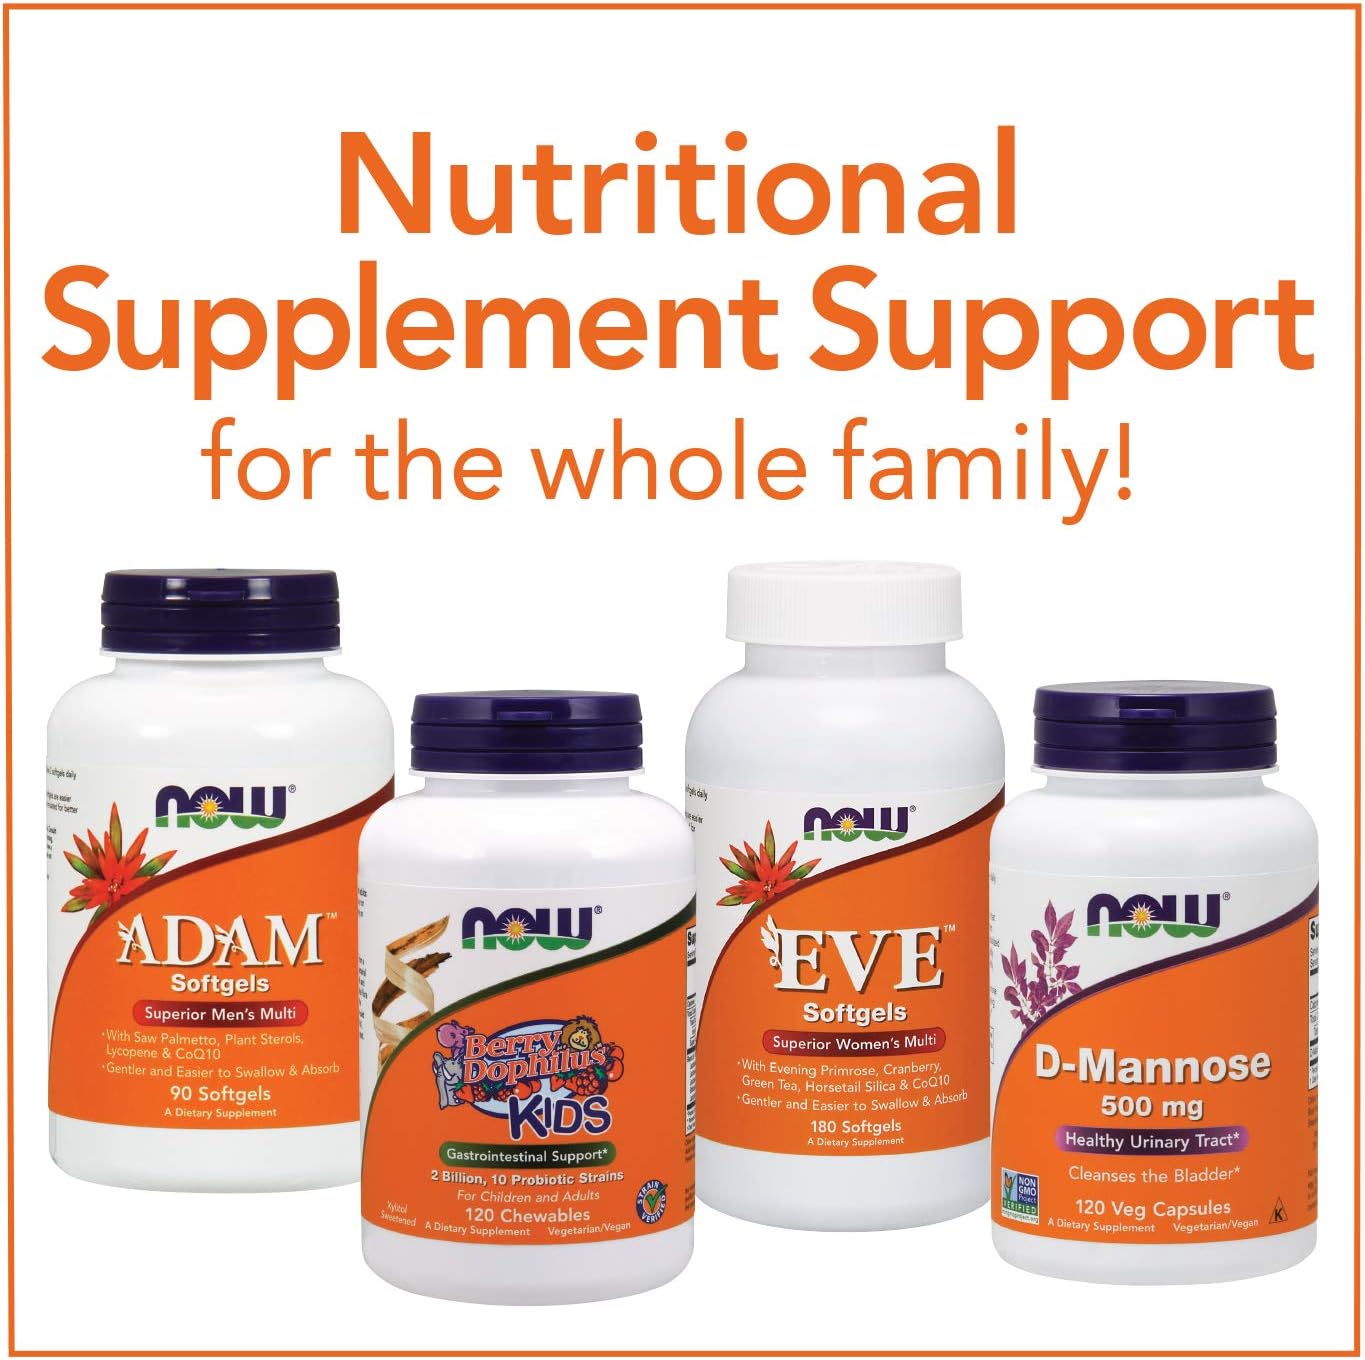  NOW Supplements, BerryDophilus with 2 Billion, 10 Probiotic Strains, Xylitol Sweetened, Strain Verified, 60 Chewables, packaging may vary